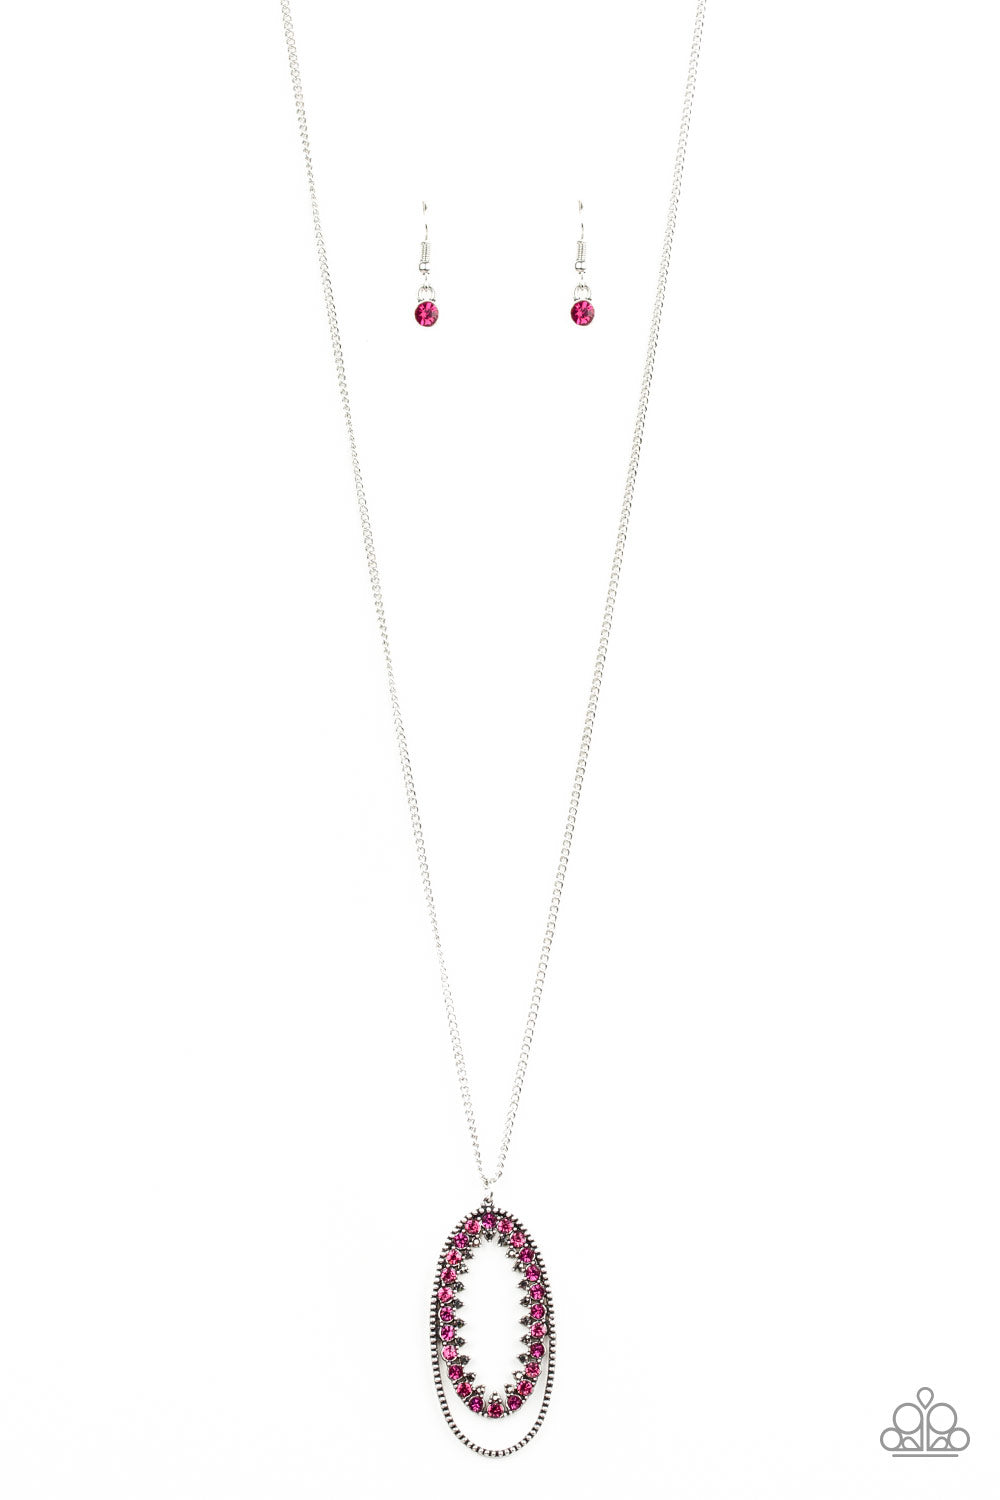 Paparazzi Accessories - Money Mood - Pink Necklace - Alies Bling Bar